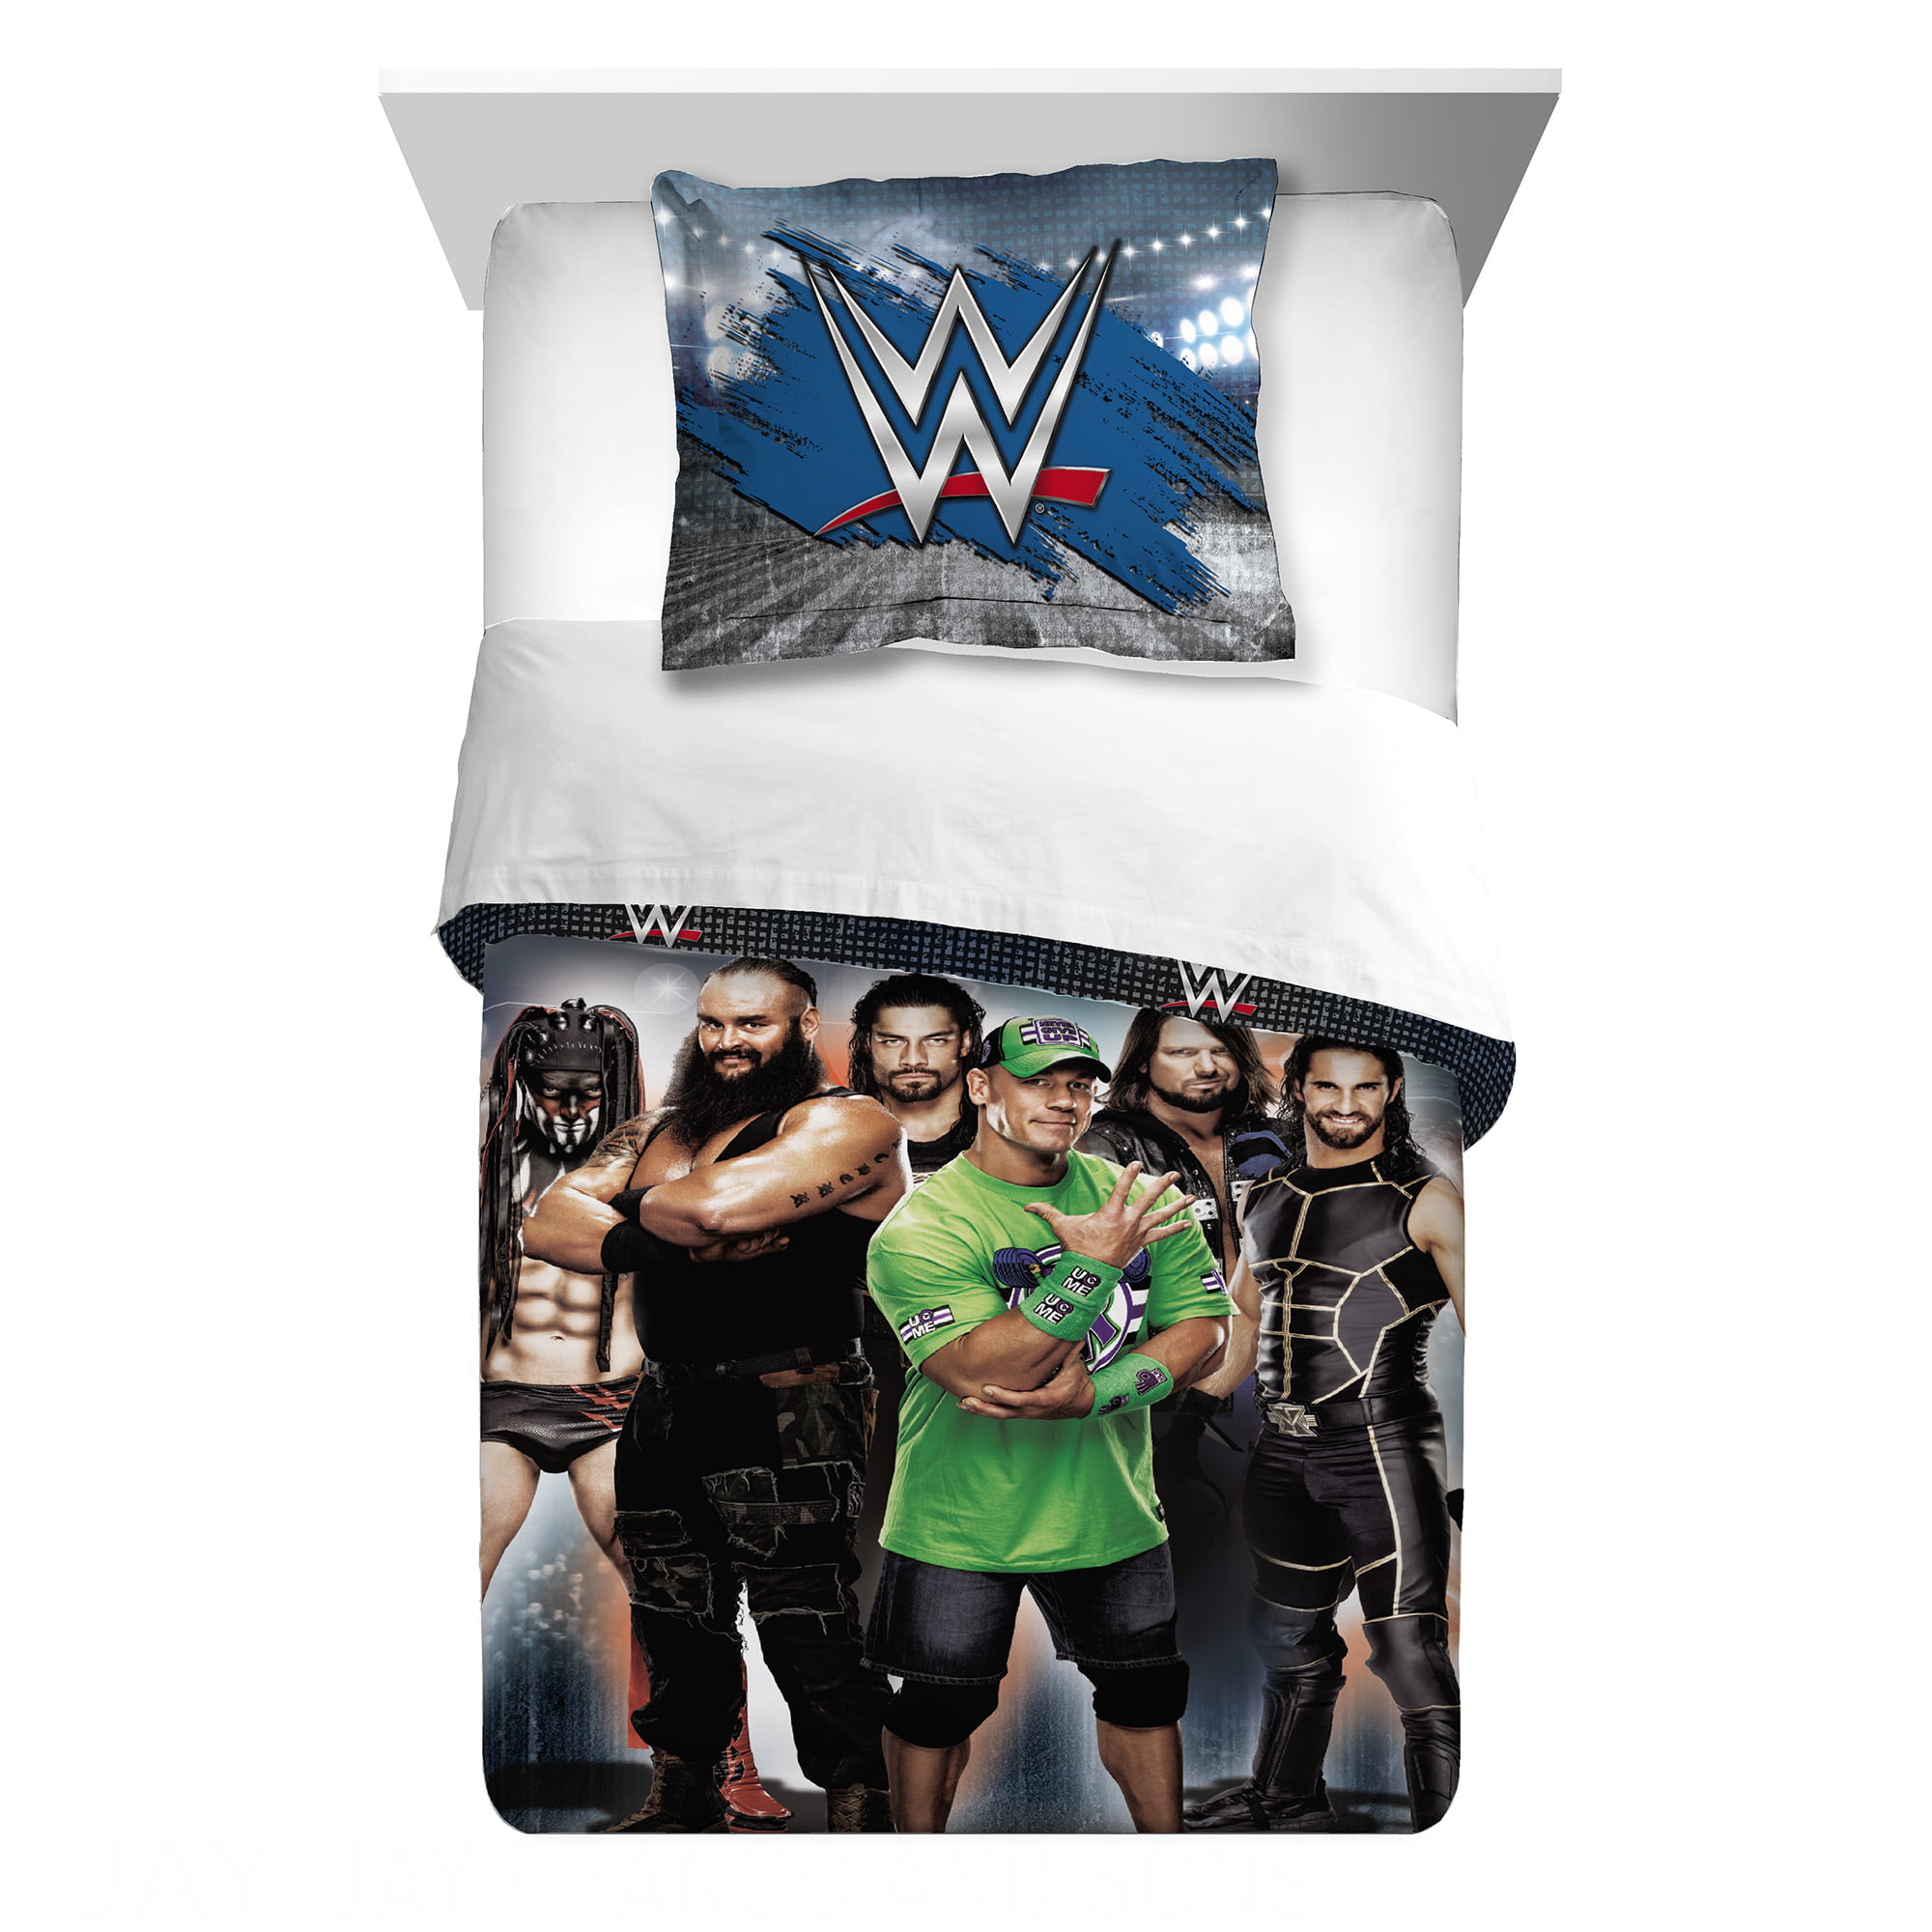 WWE Armageddon Twin Sheet Set 3 Piece Flat and Fitted Sheets Plus Pillowcase 